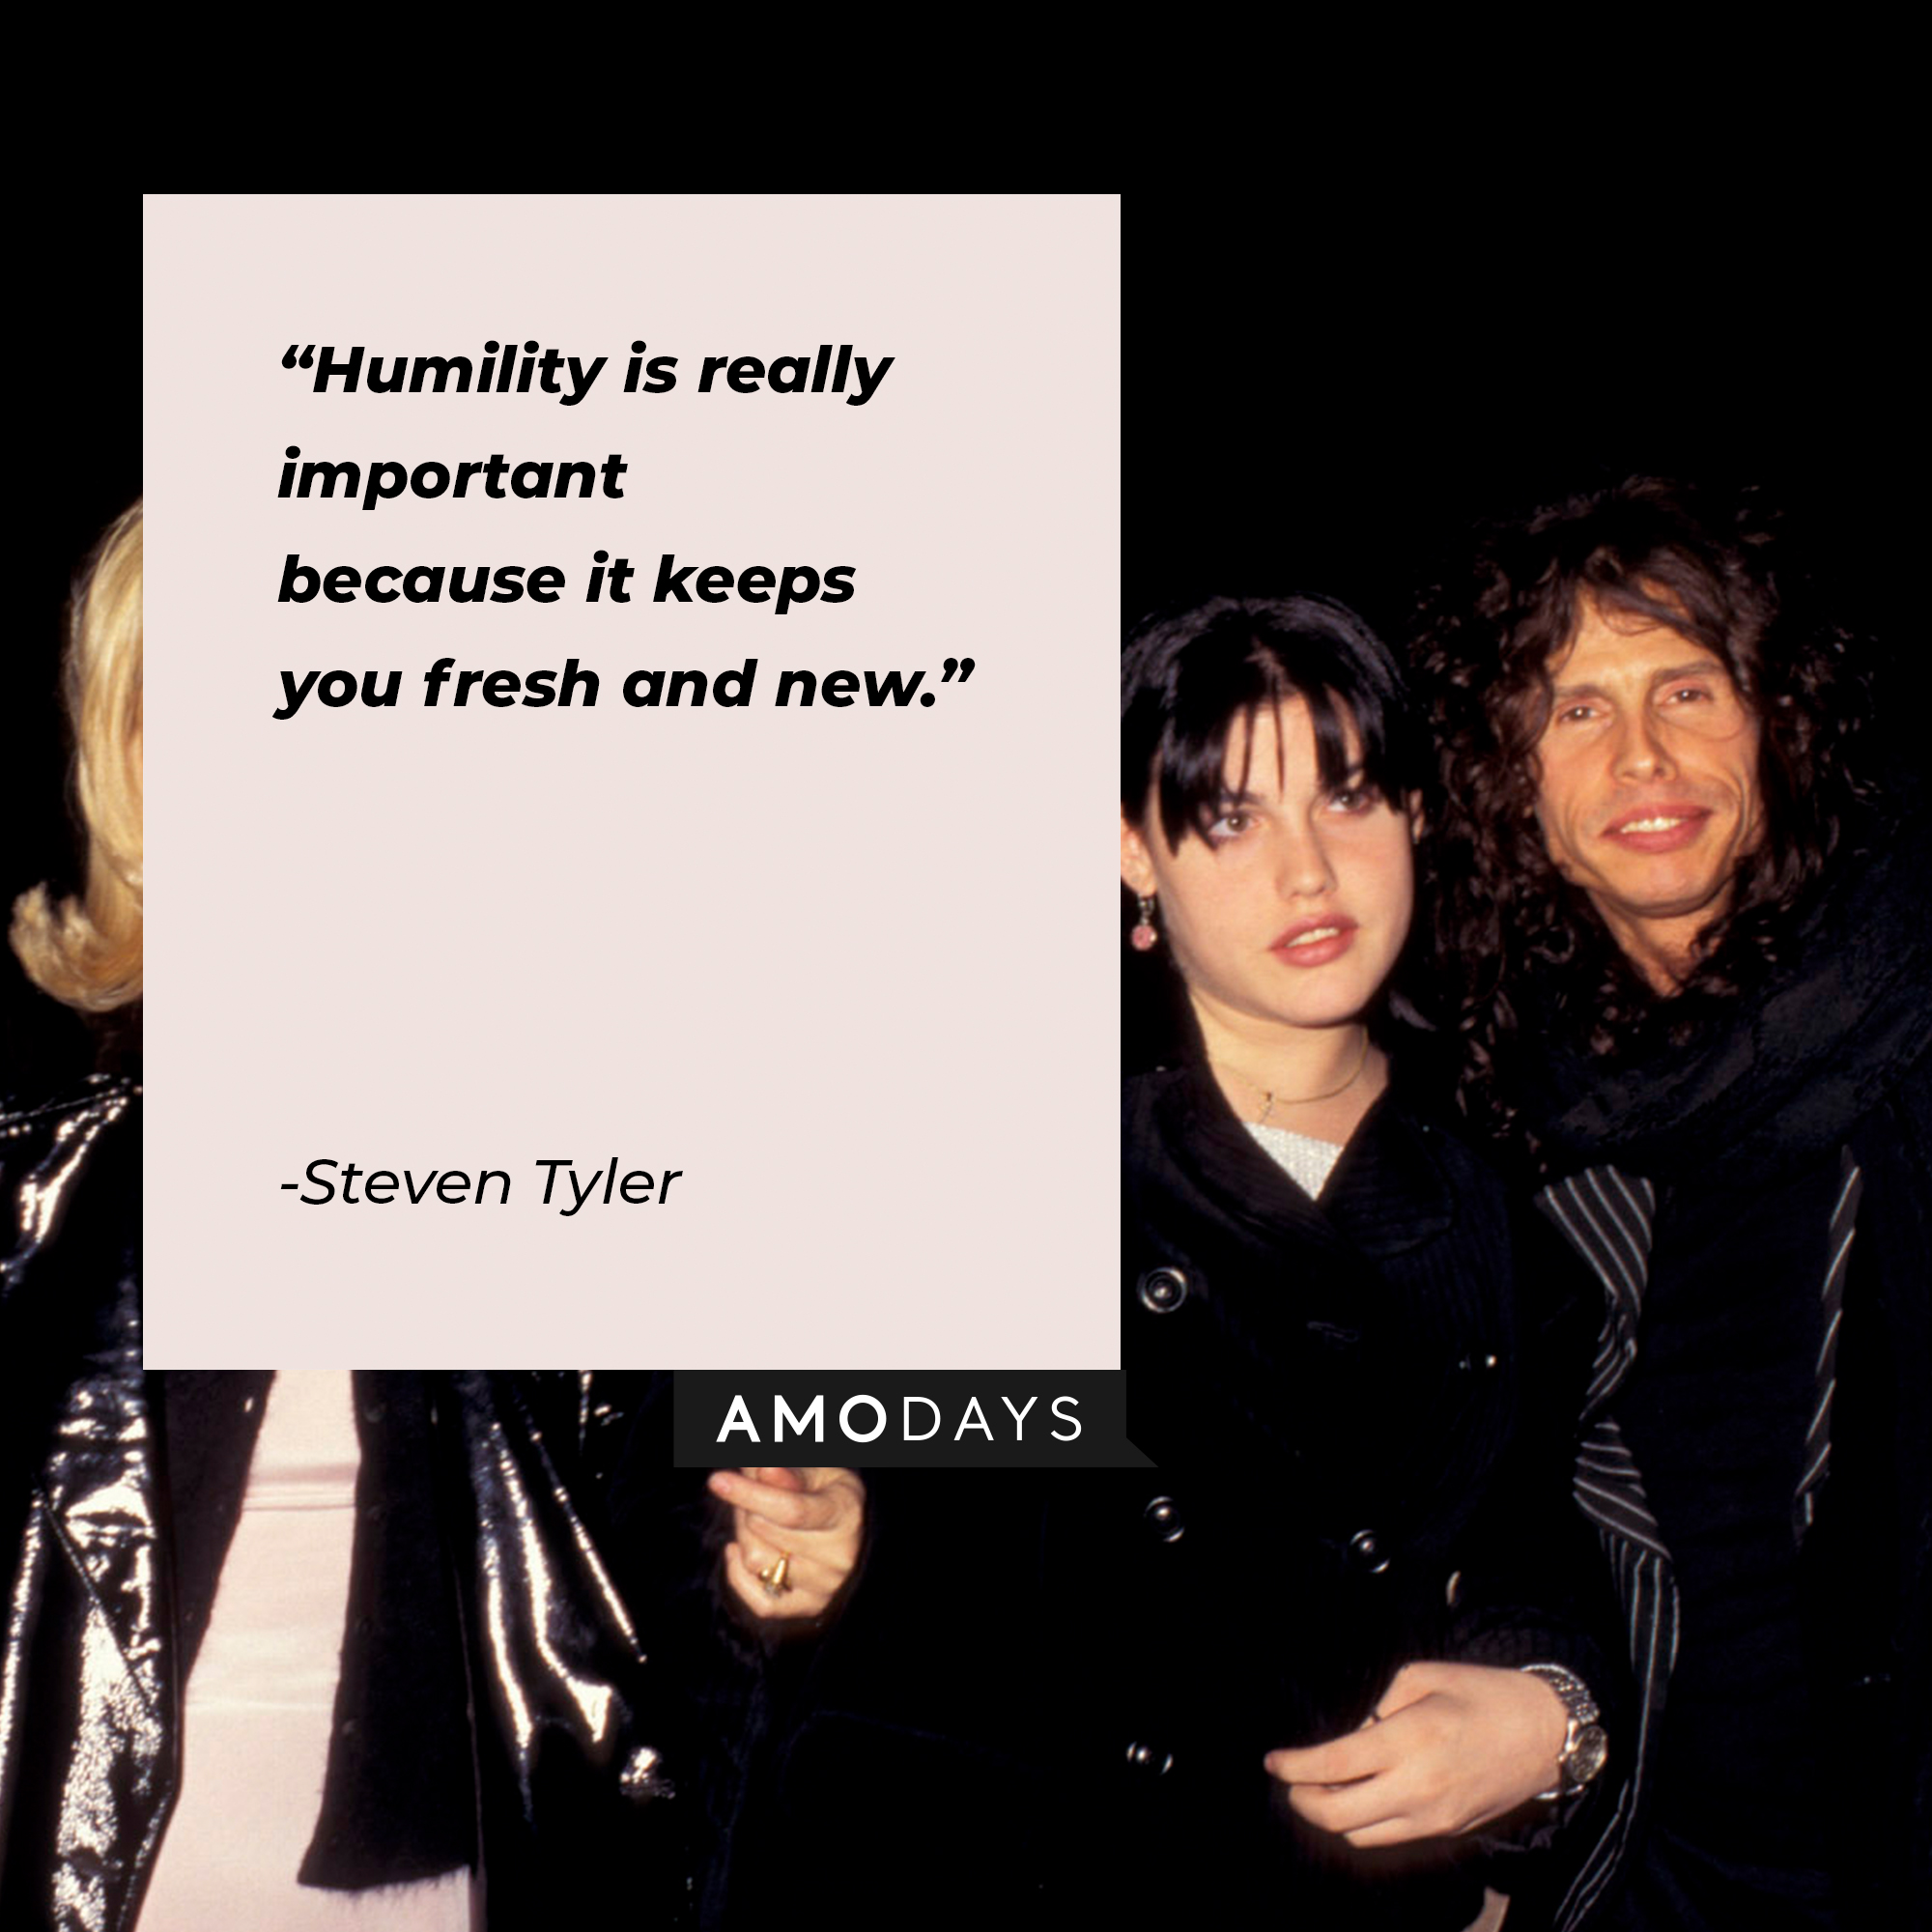 Steven Tyler's quote: "Humility is really important because it keeps you fresh and new." | Source: Getty Images